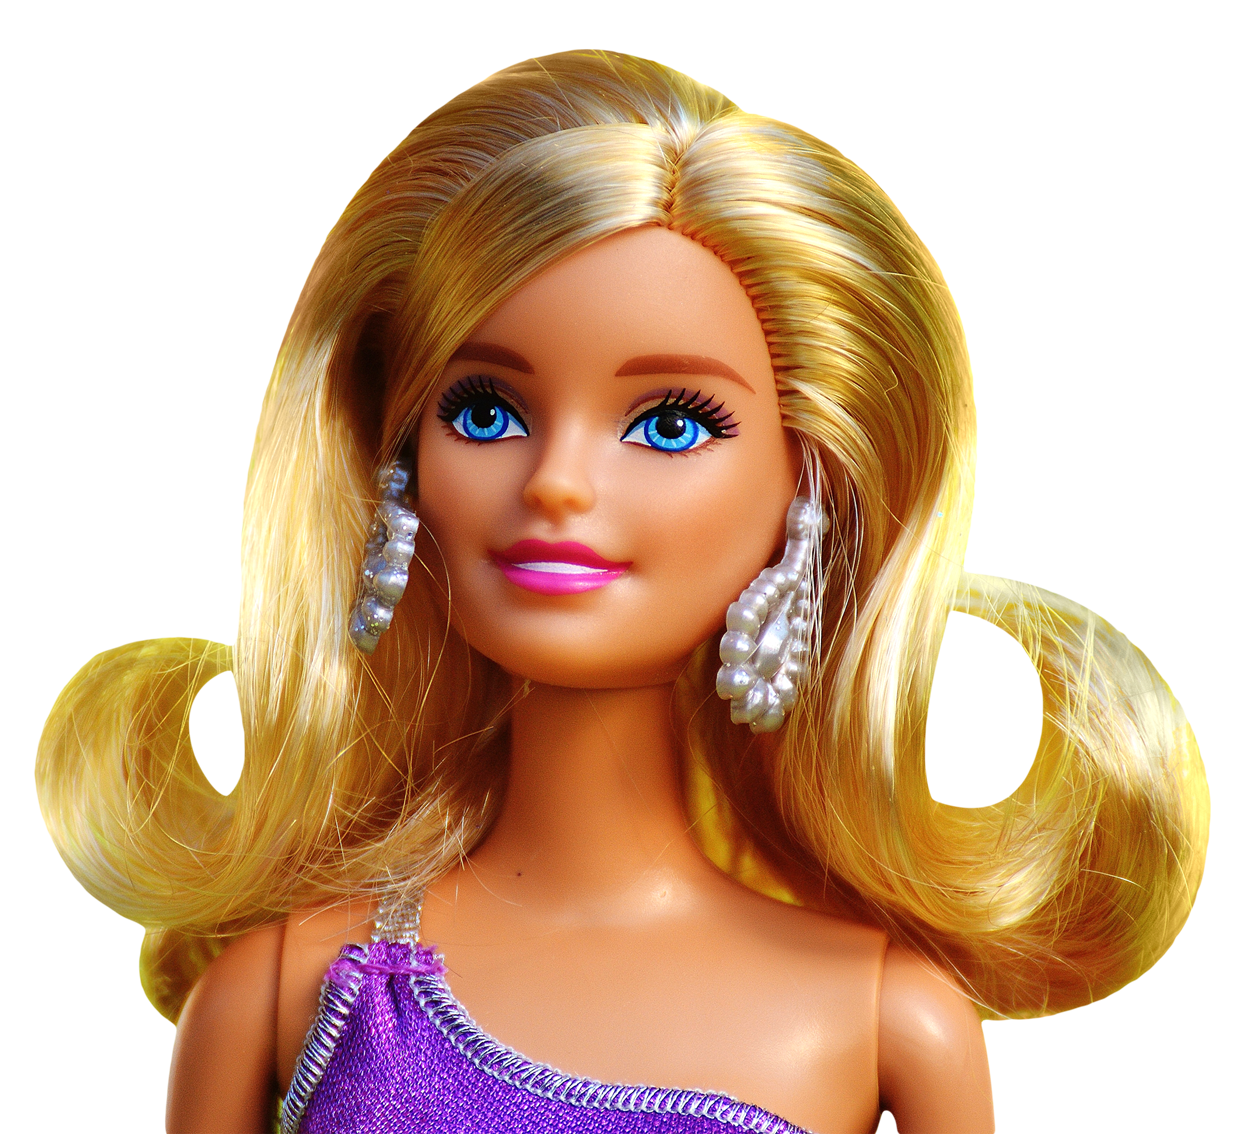 Hairstyle Doll Barbie HQ Image Free PNG Image